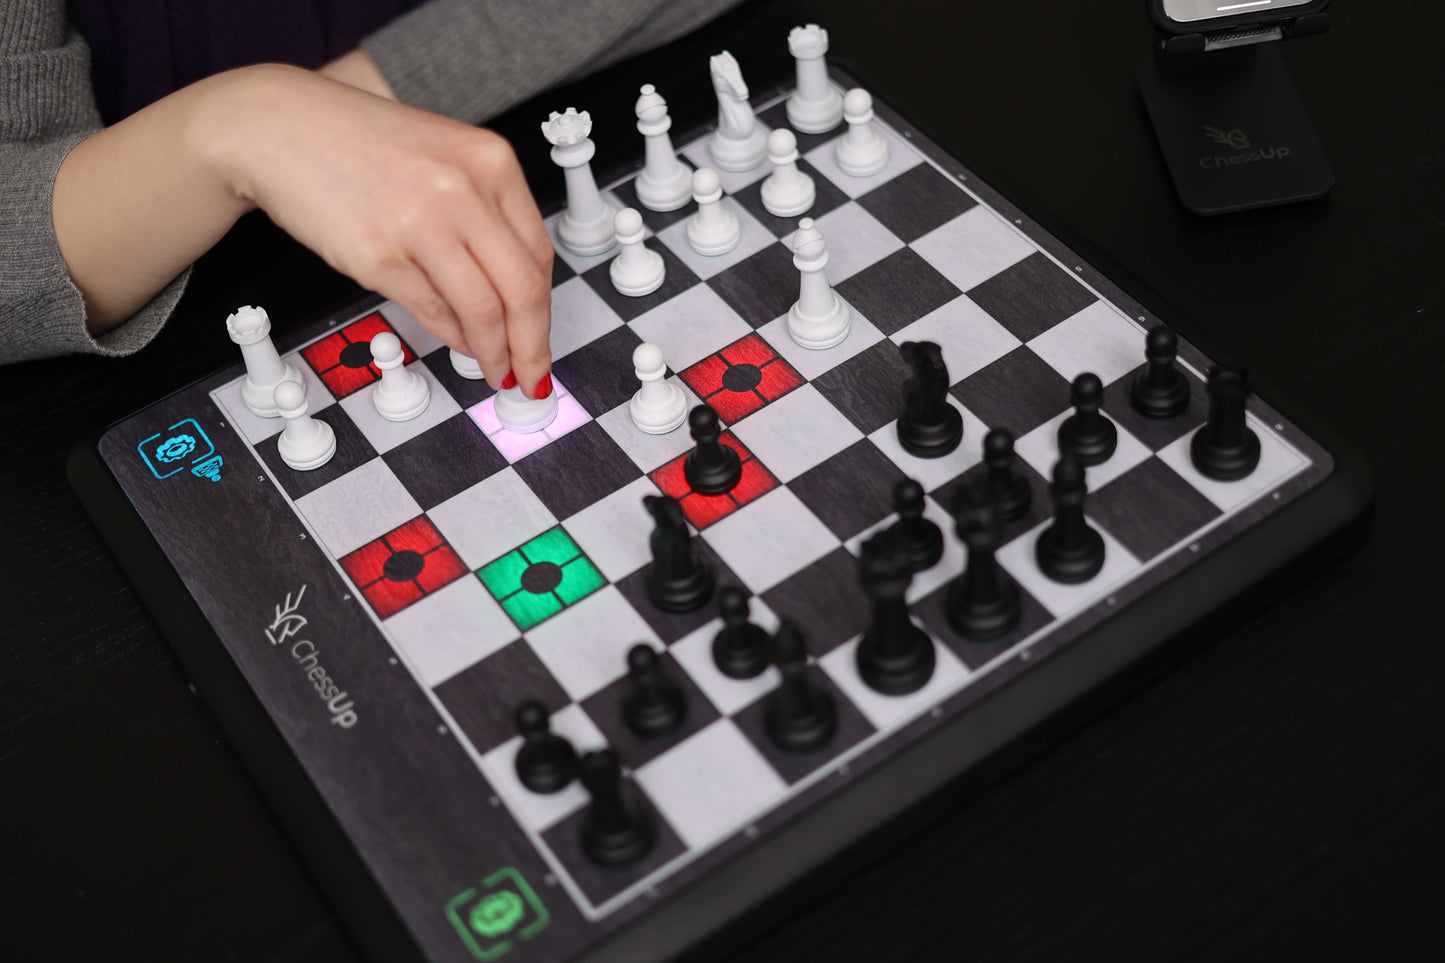 ChessUp chess computer and connected chessboard from $249 - Geeky